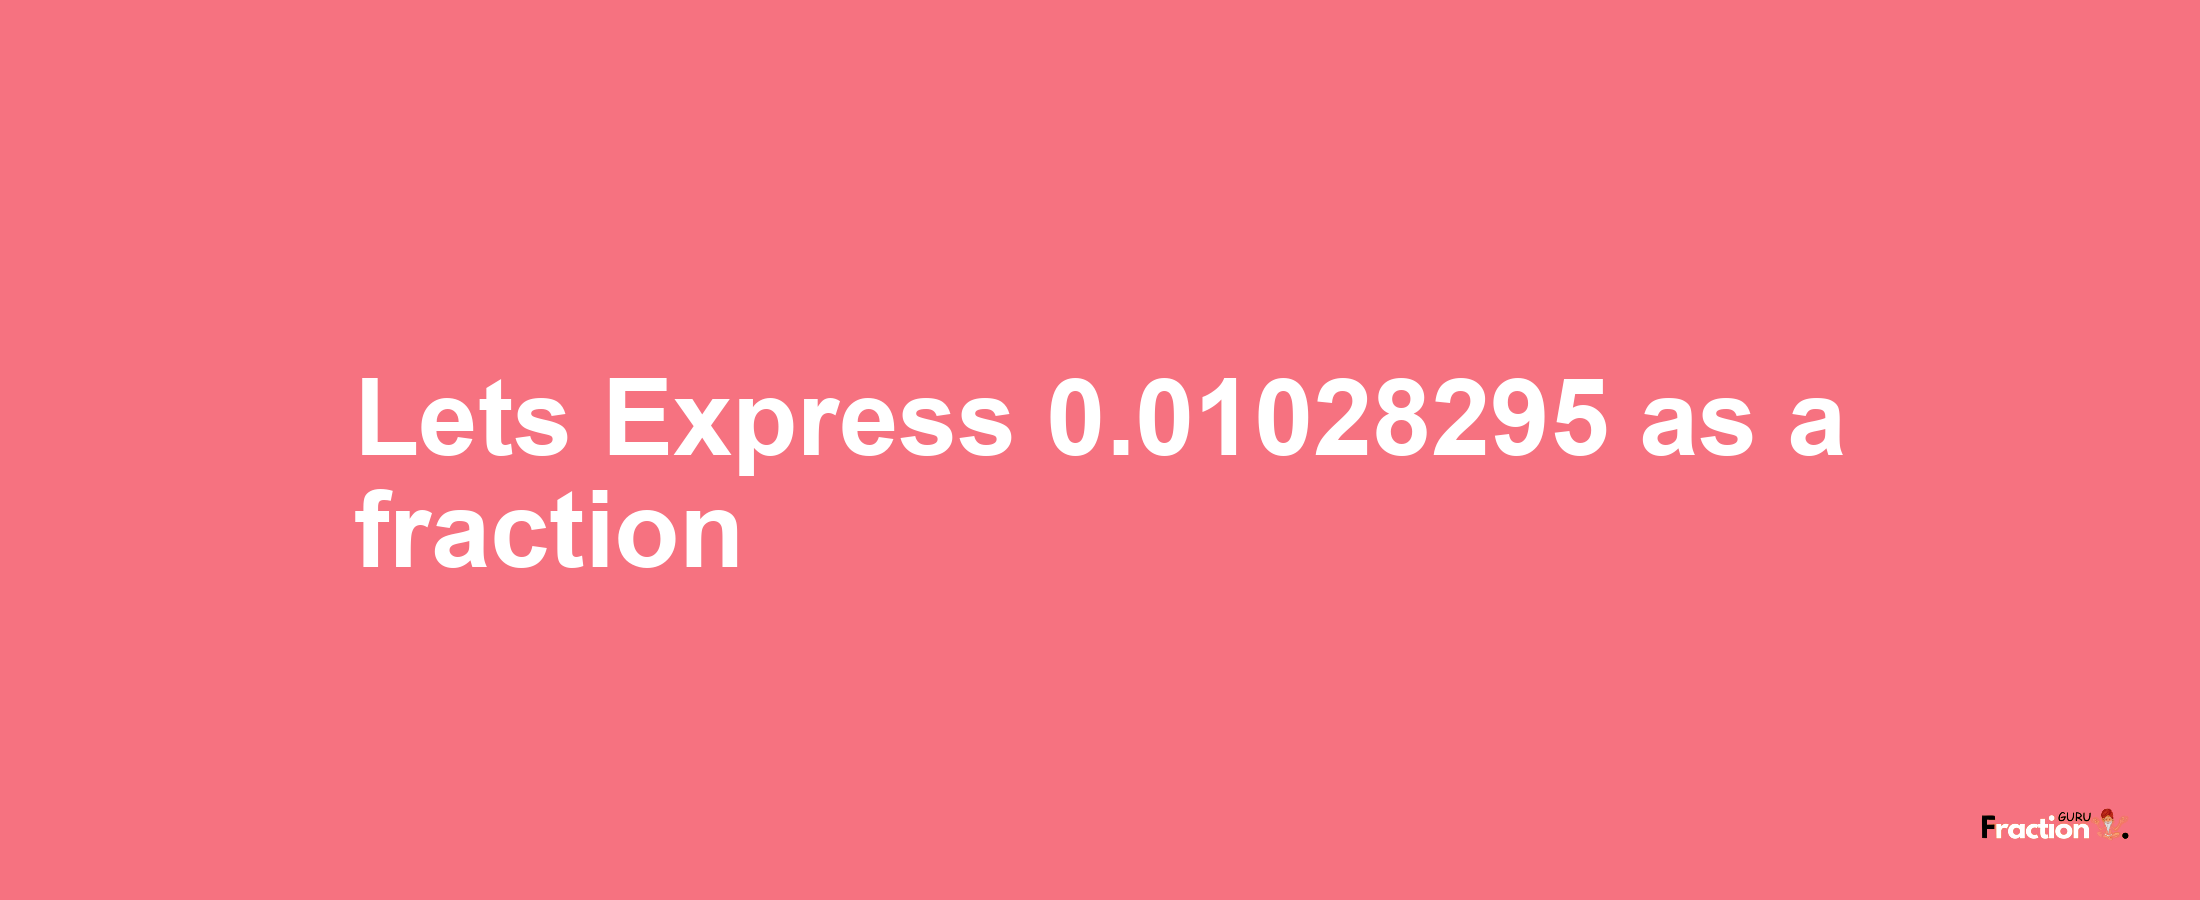 Lets Express 0.01028295 as afraction